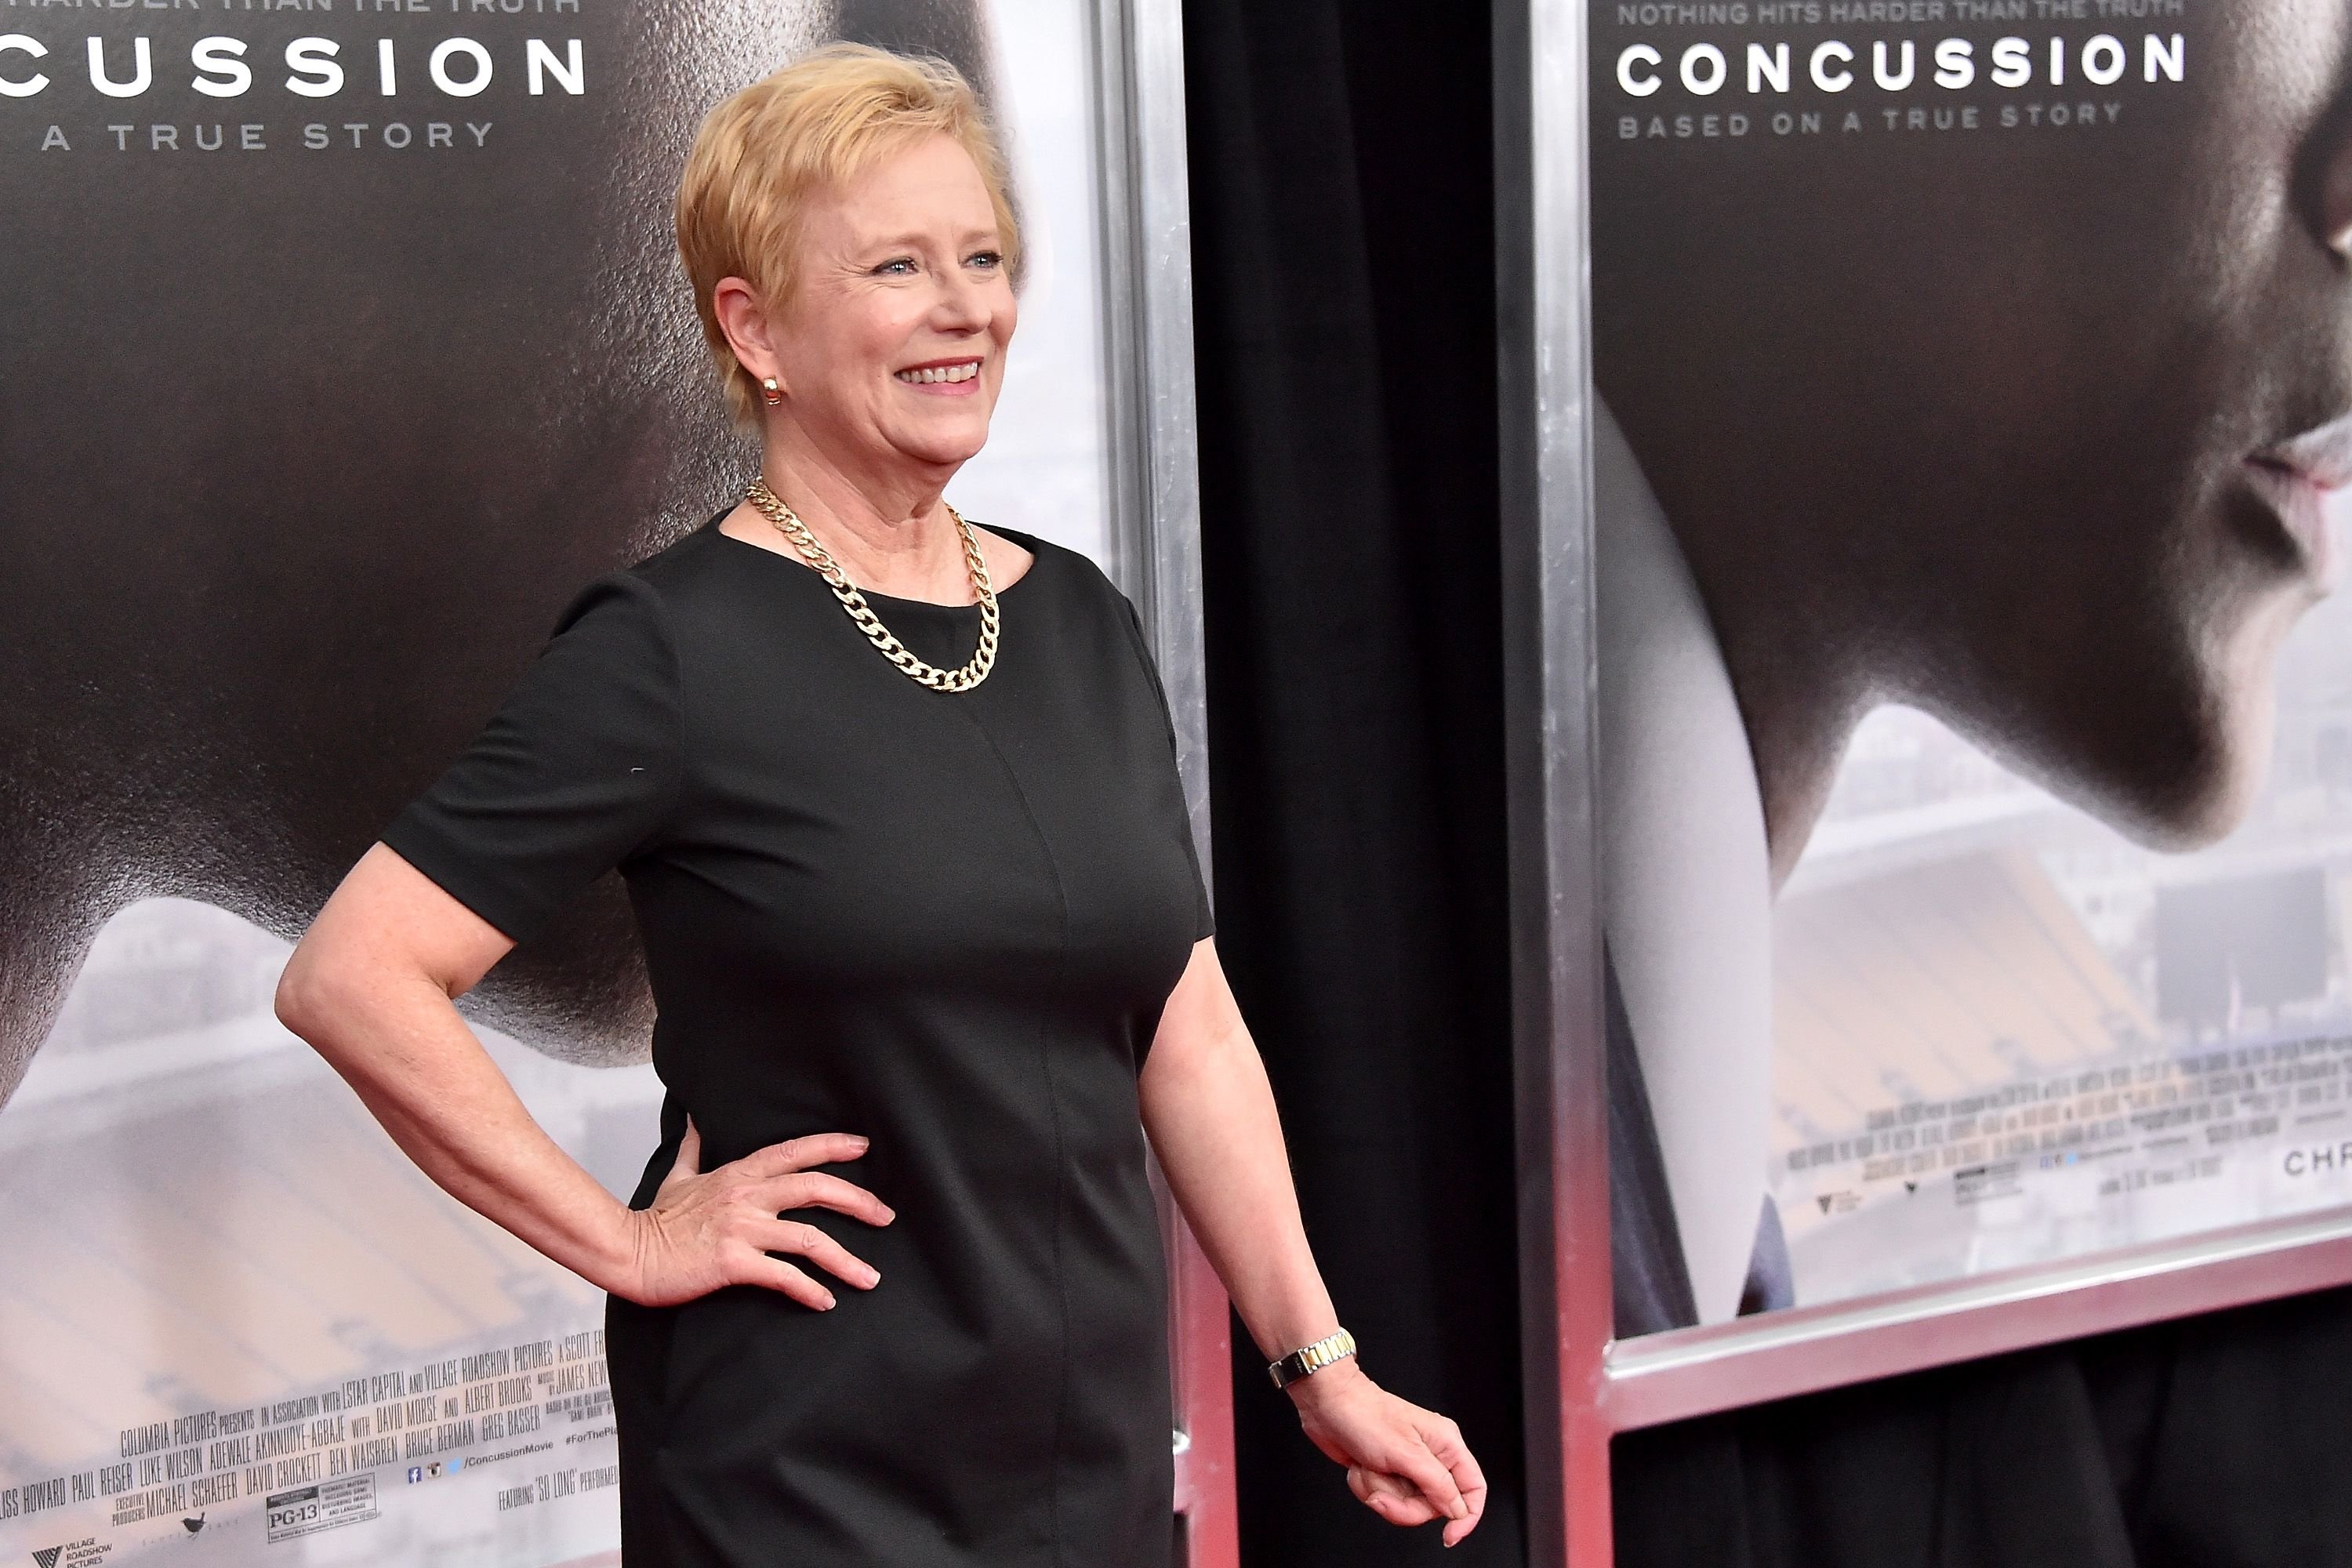 Eve Plumb attends the "Concussion" New York Premiere at AMC Loews Lincoln Square on December 16, 2015 in New York City. | Source: Getty Images